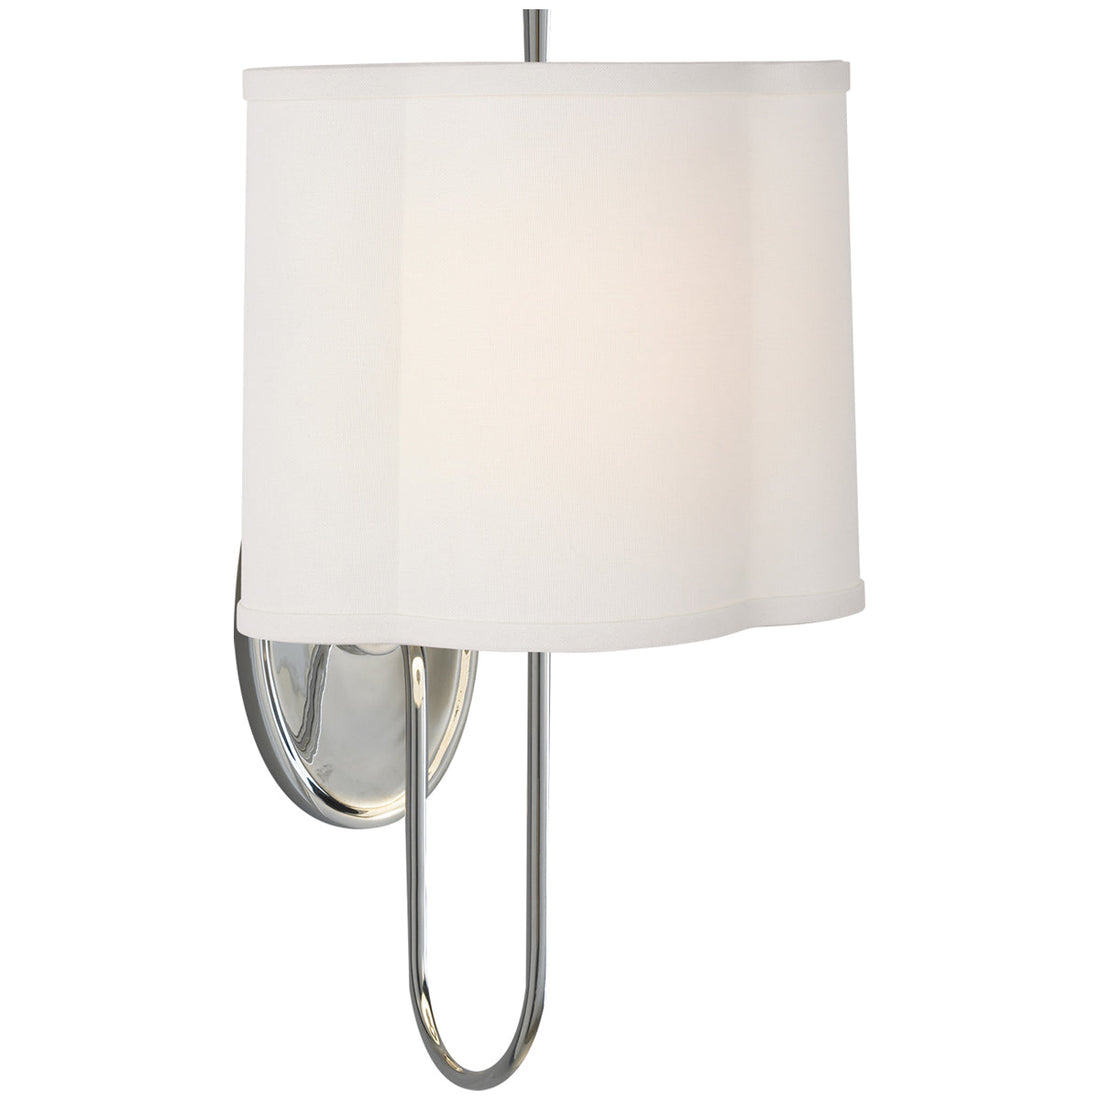 Visual Comfort Simple Scallop Wall Sconce with Linen Shade